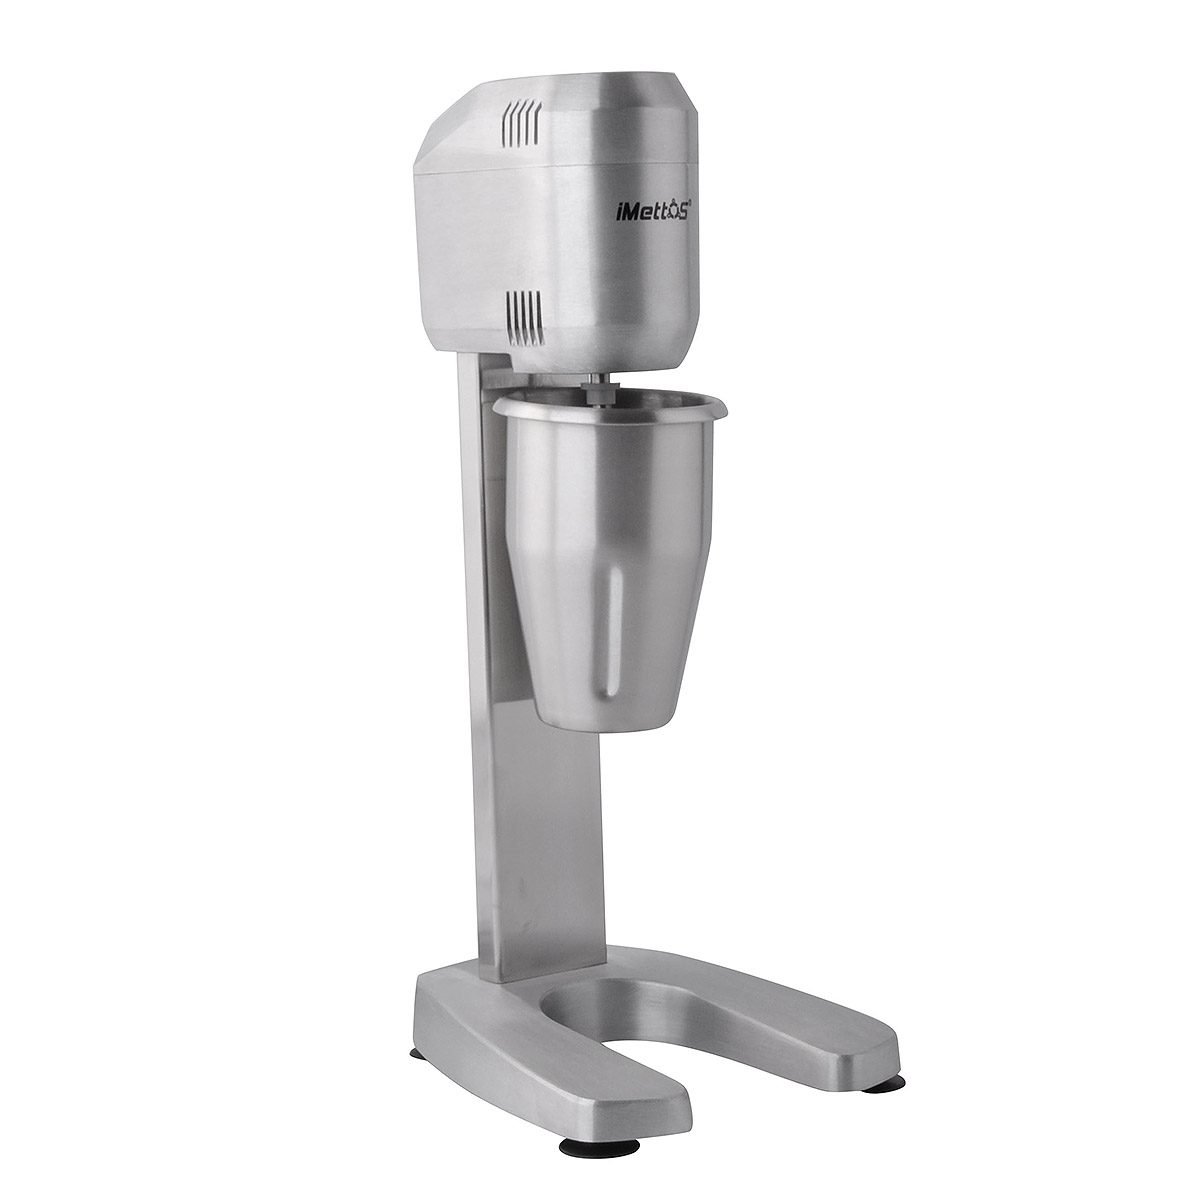 New Imettos 401006 Single Drink Mixer For Sale